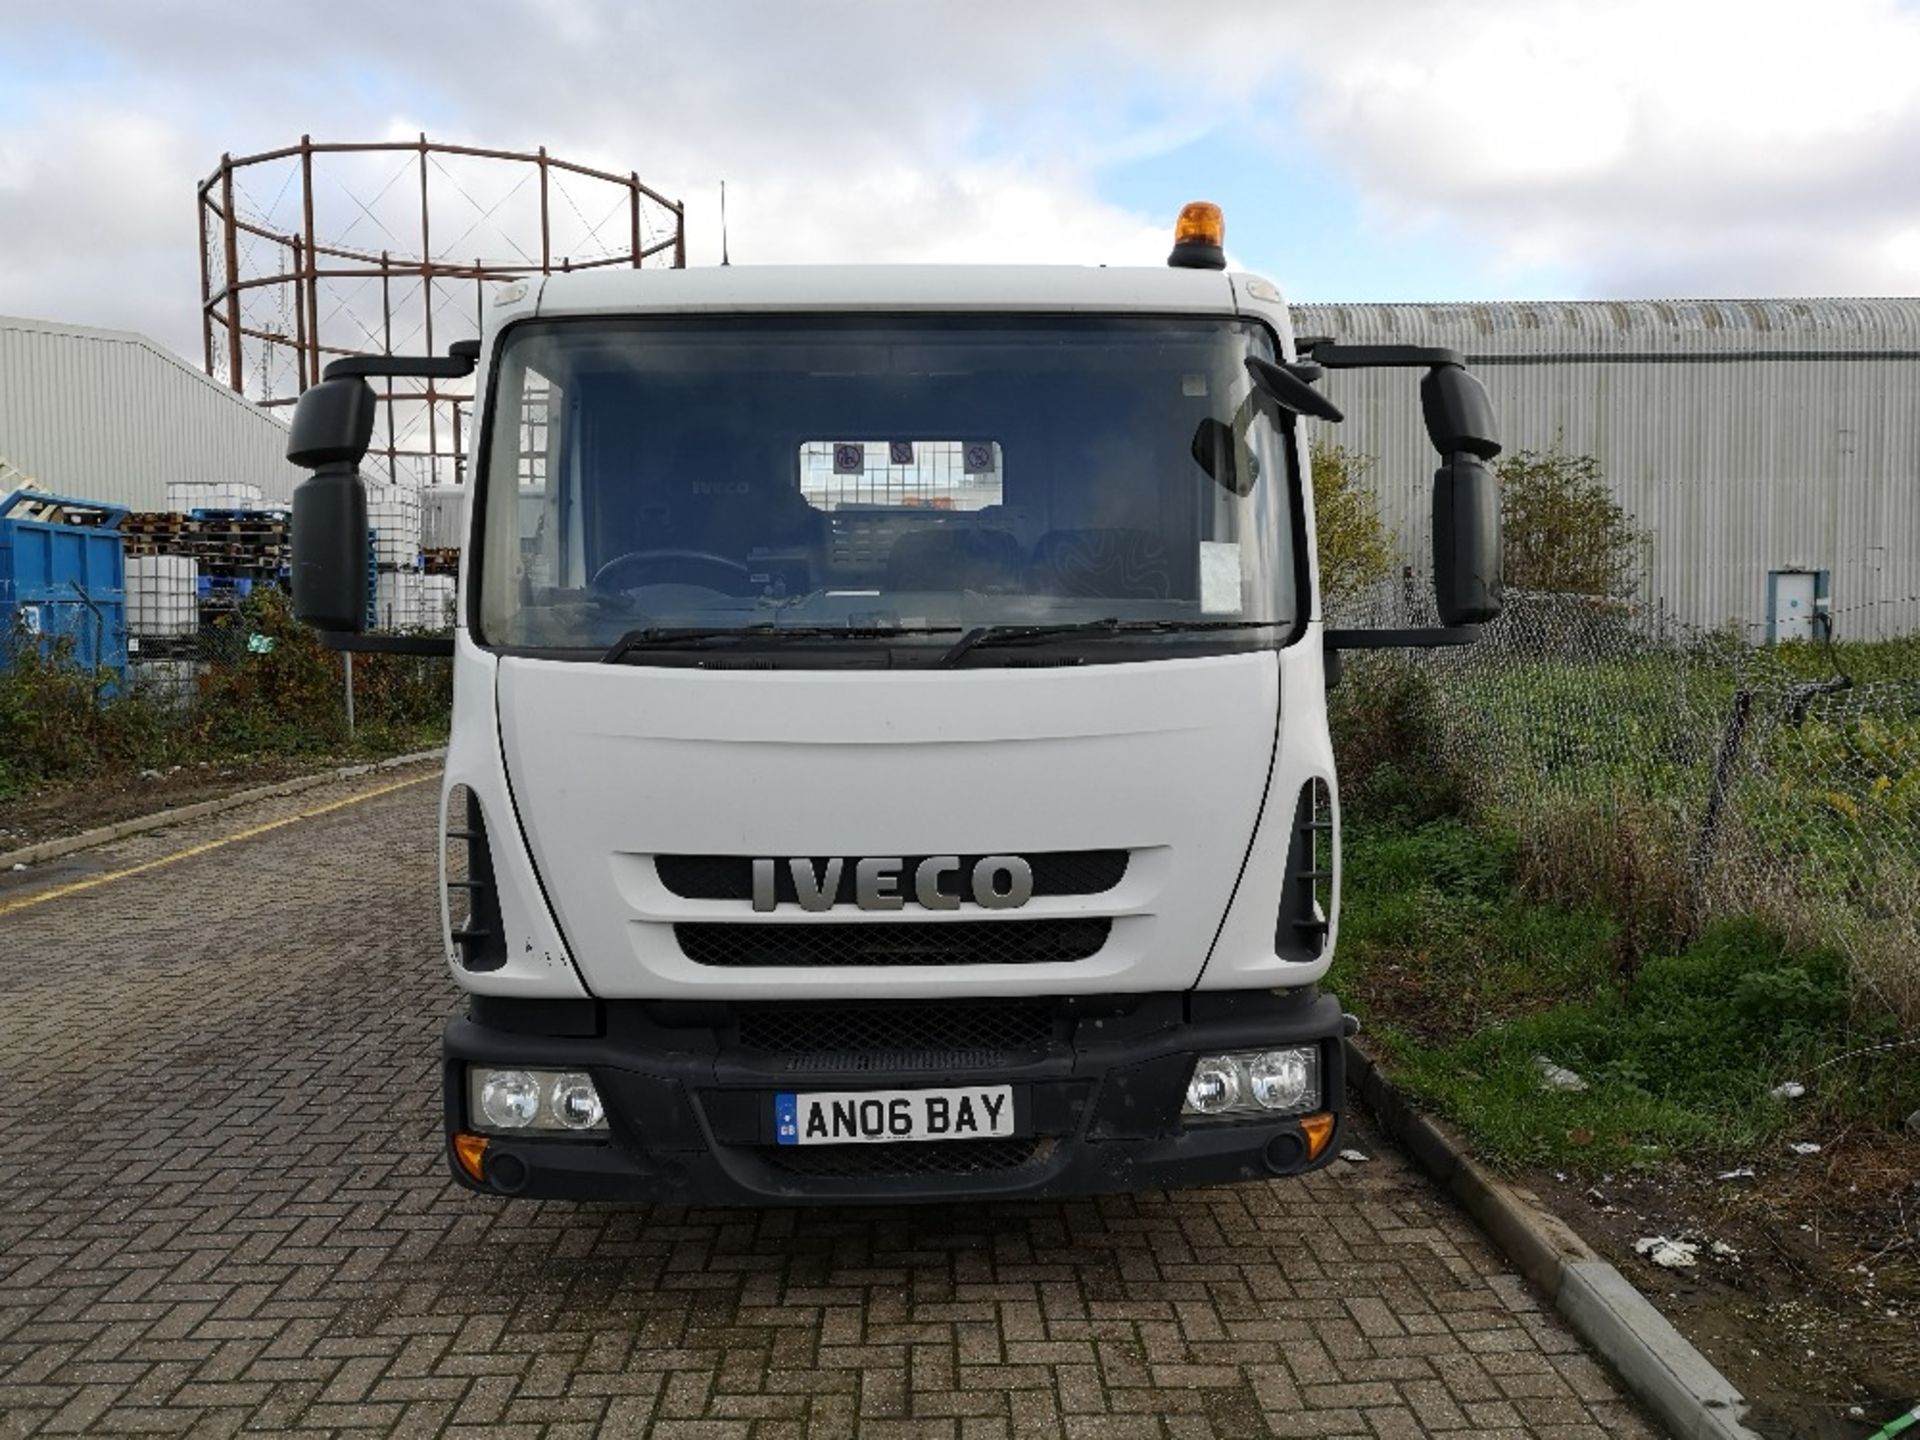 IVECO Eurocargo 75e16 day cab 7.5t automatic dropside truck, Registration No. AN06 BAY - Image 11 of 14